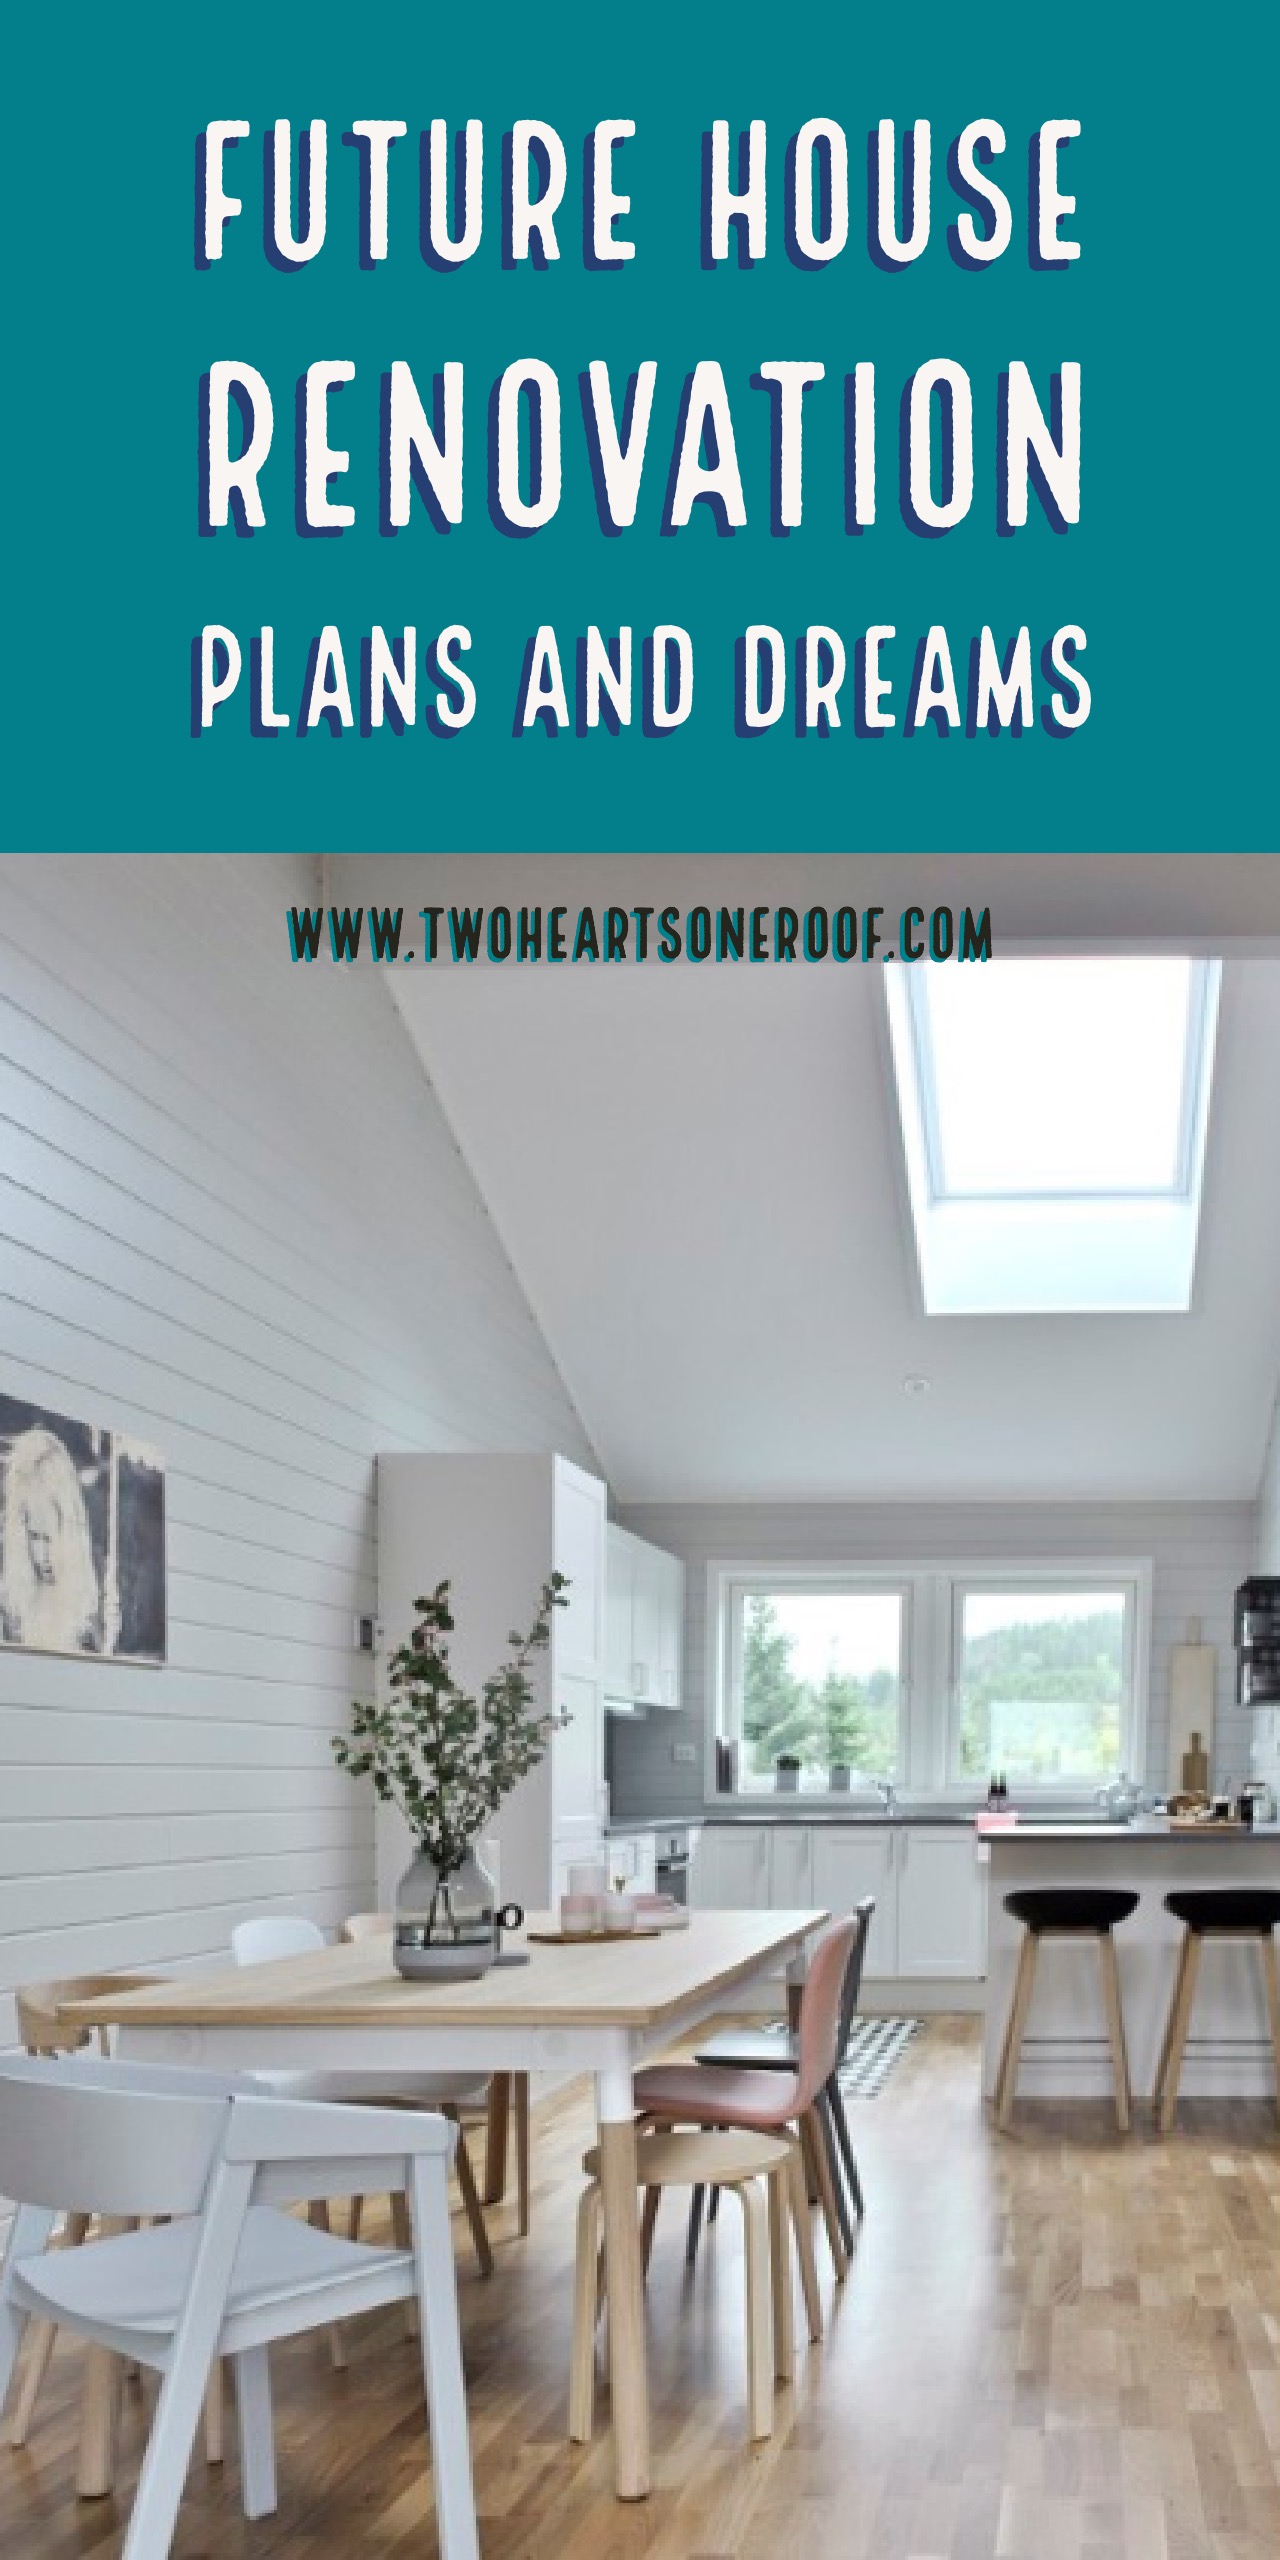 Future House Renovation Plans and Dreams